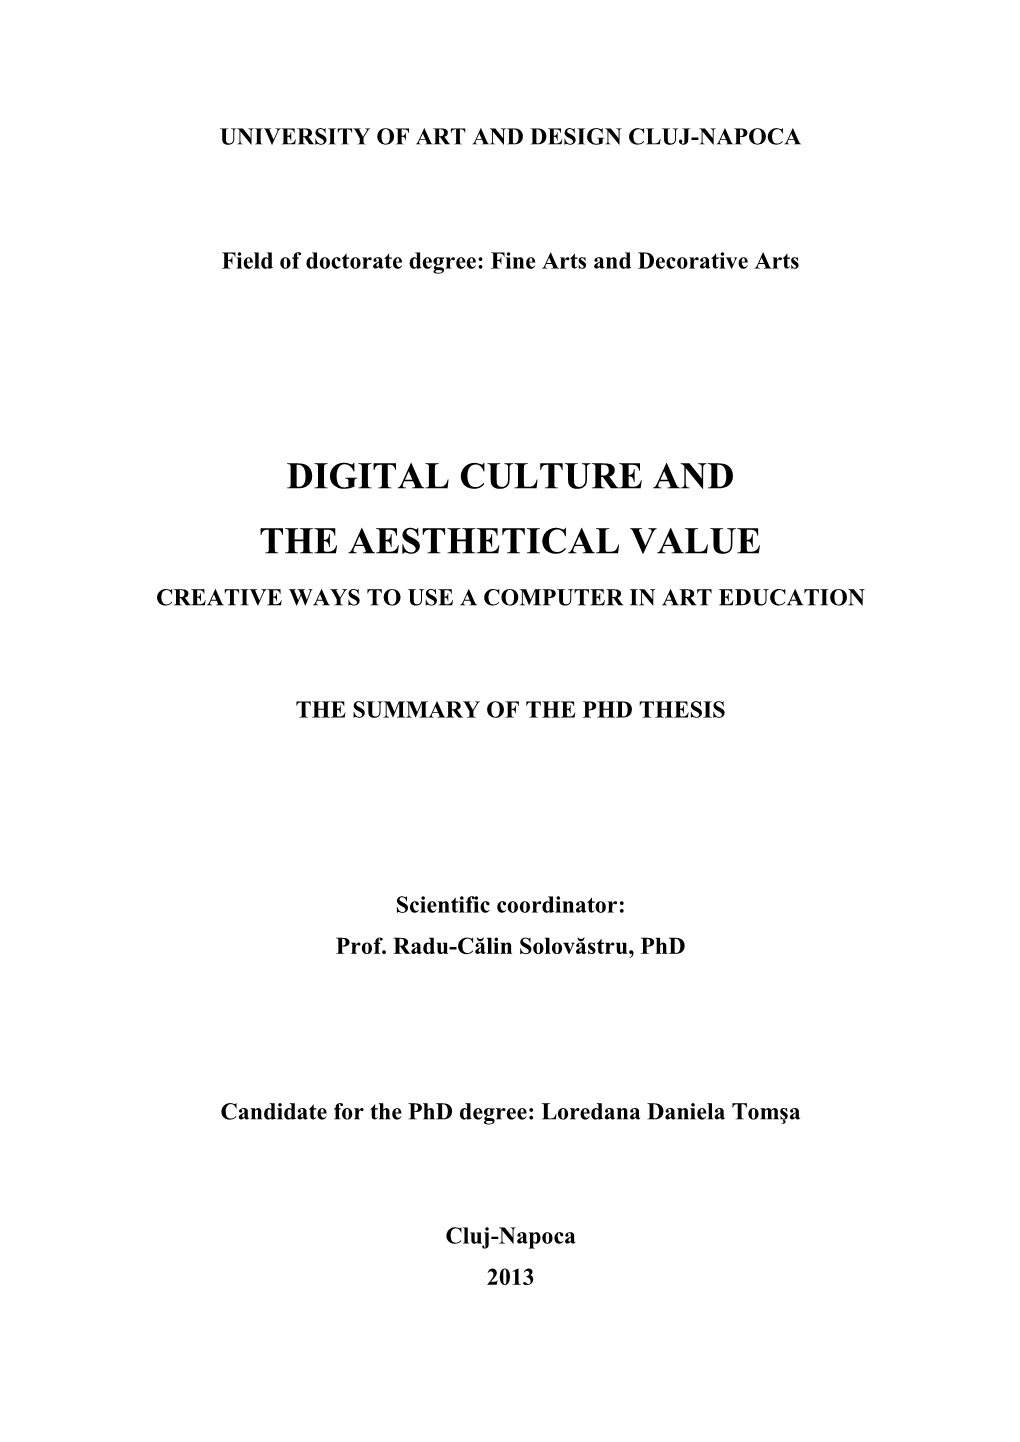 Digital Culture and the Aesthetical Value